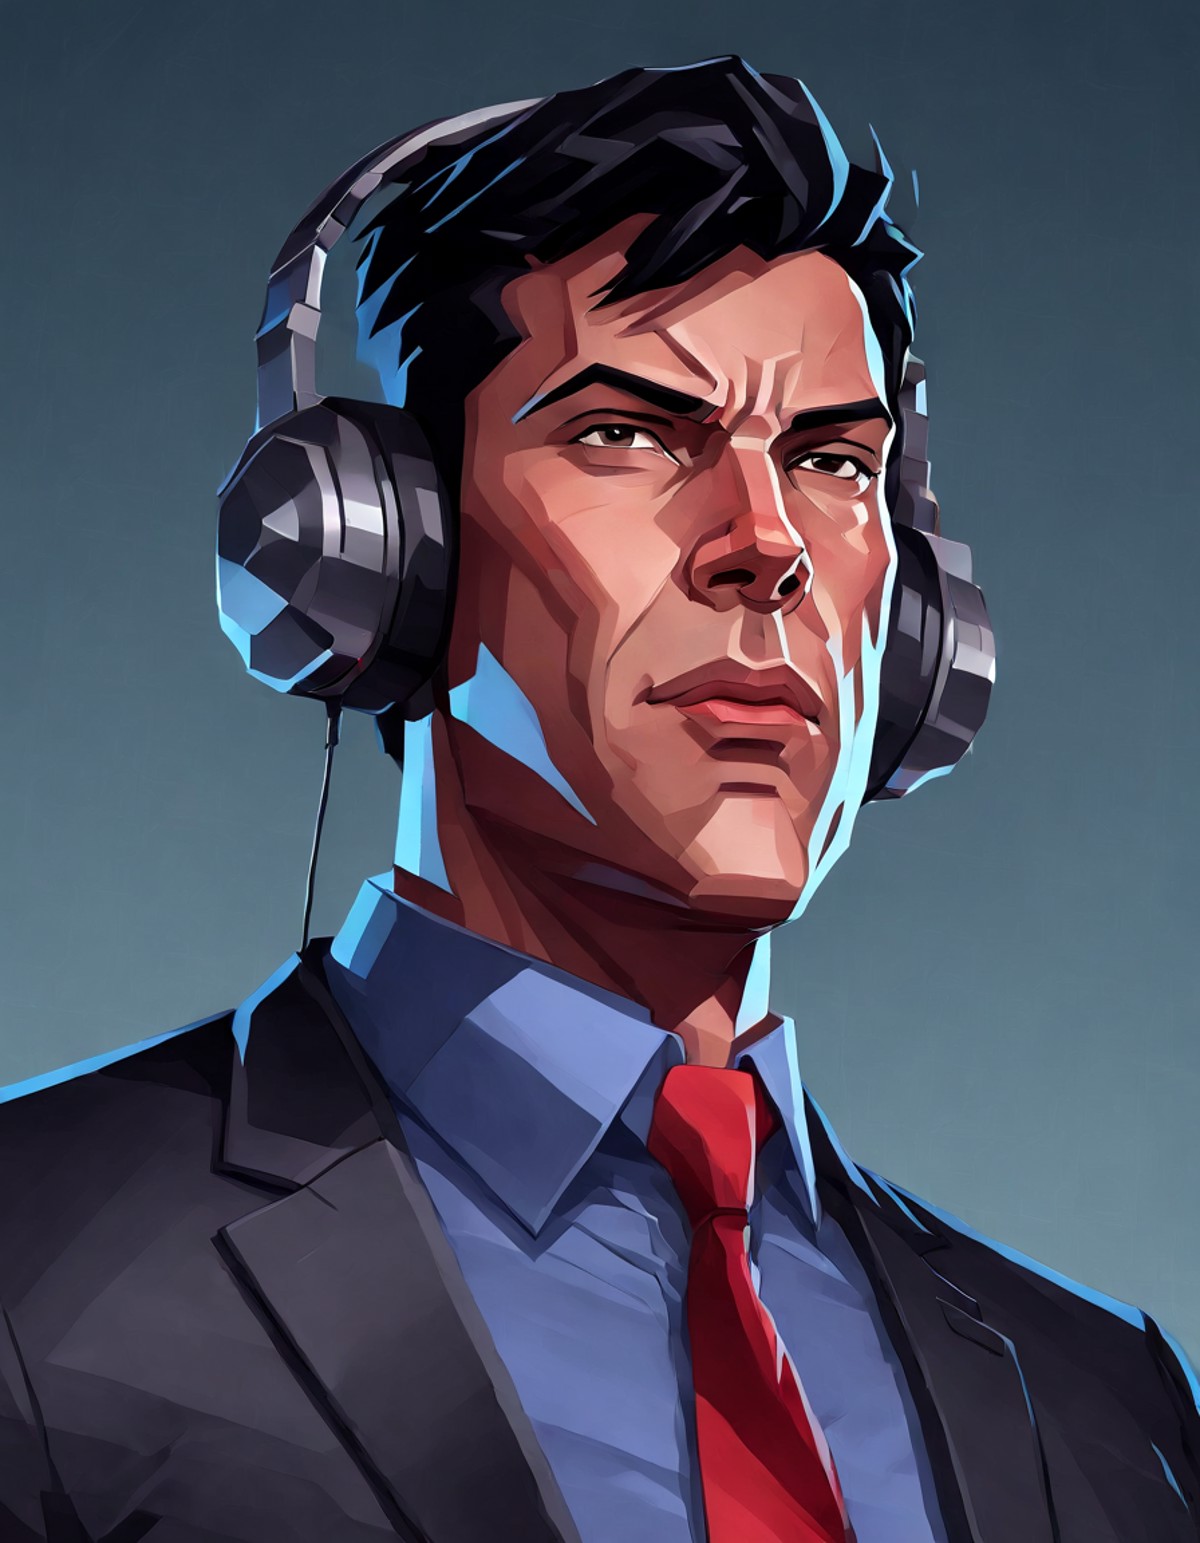 a closeup picture of a man, solo, with headphones and short black hair, wearing black suit and blue shirt and red tie